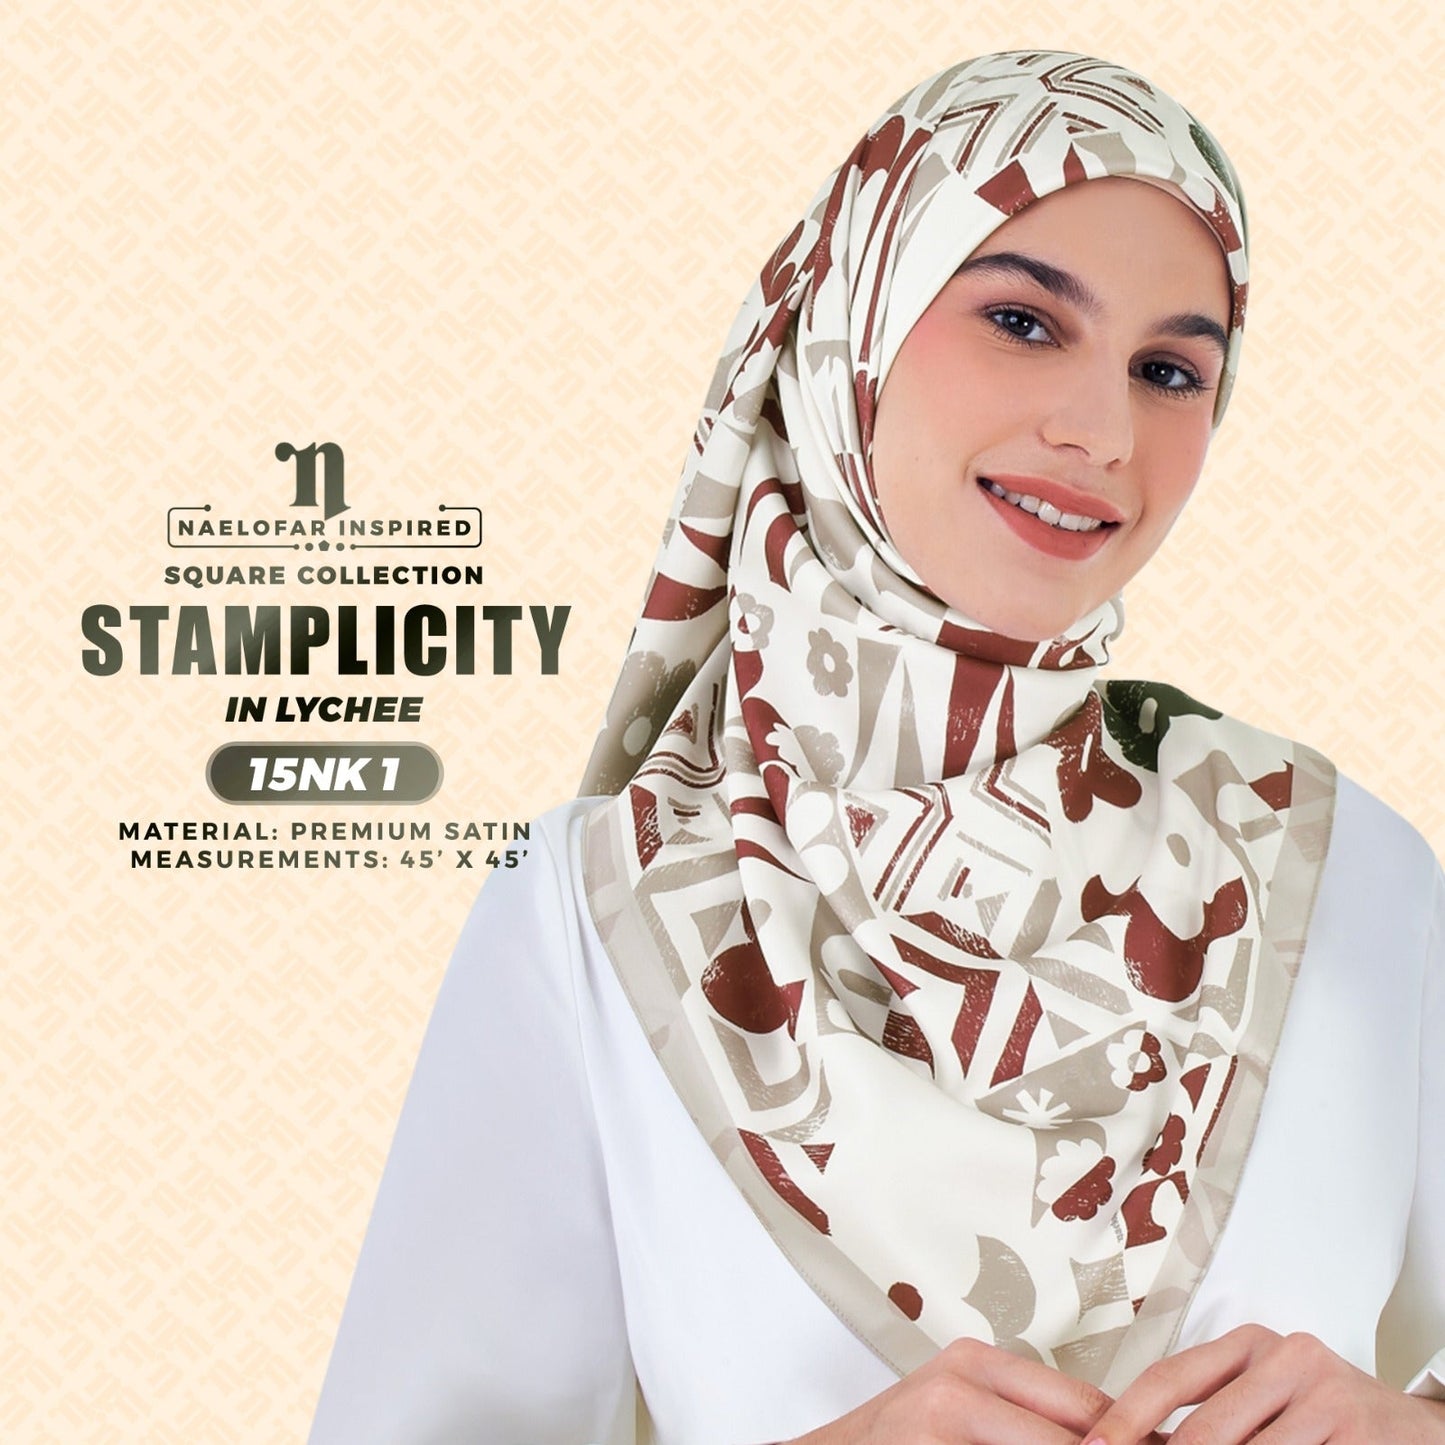 Naelofar Inspired Stamplicity Printed SQ Collection